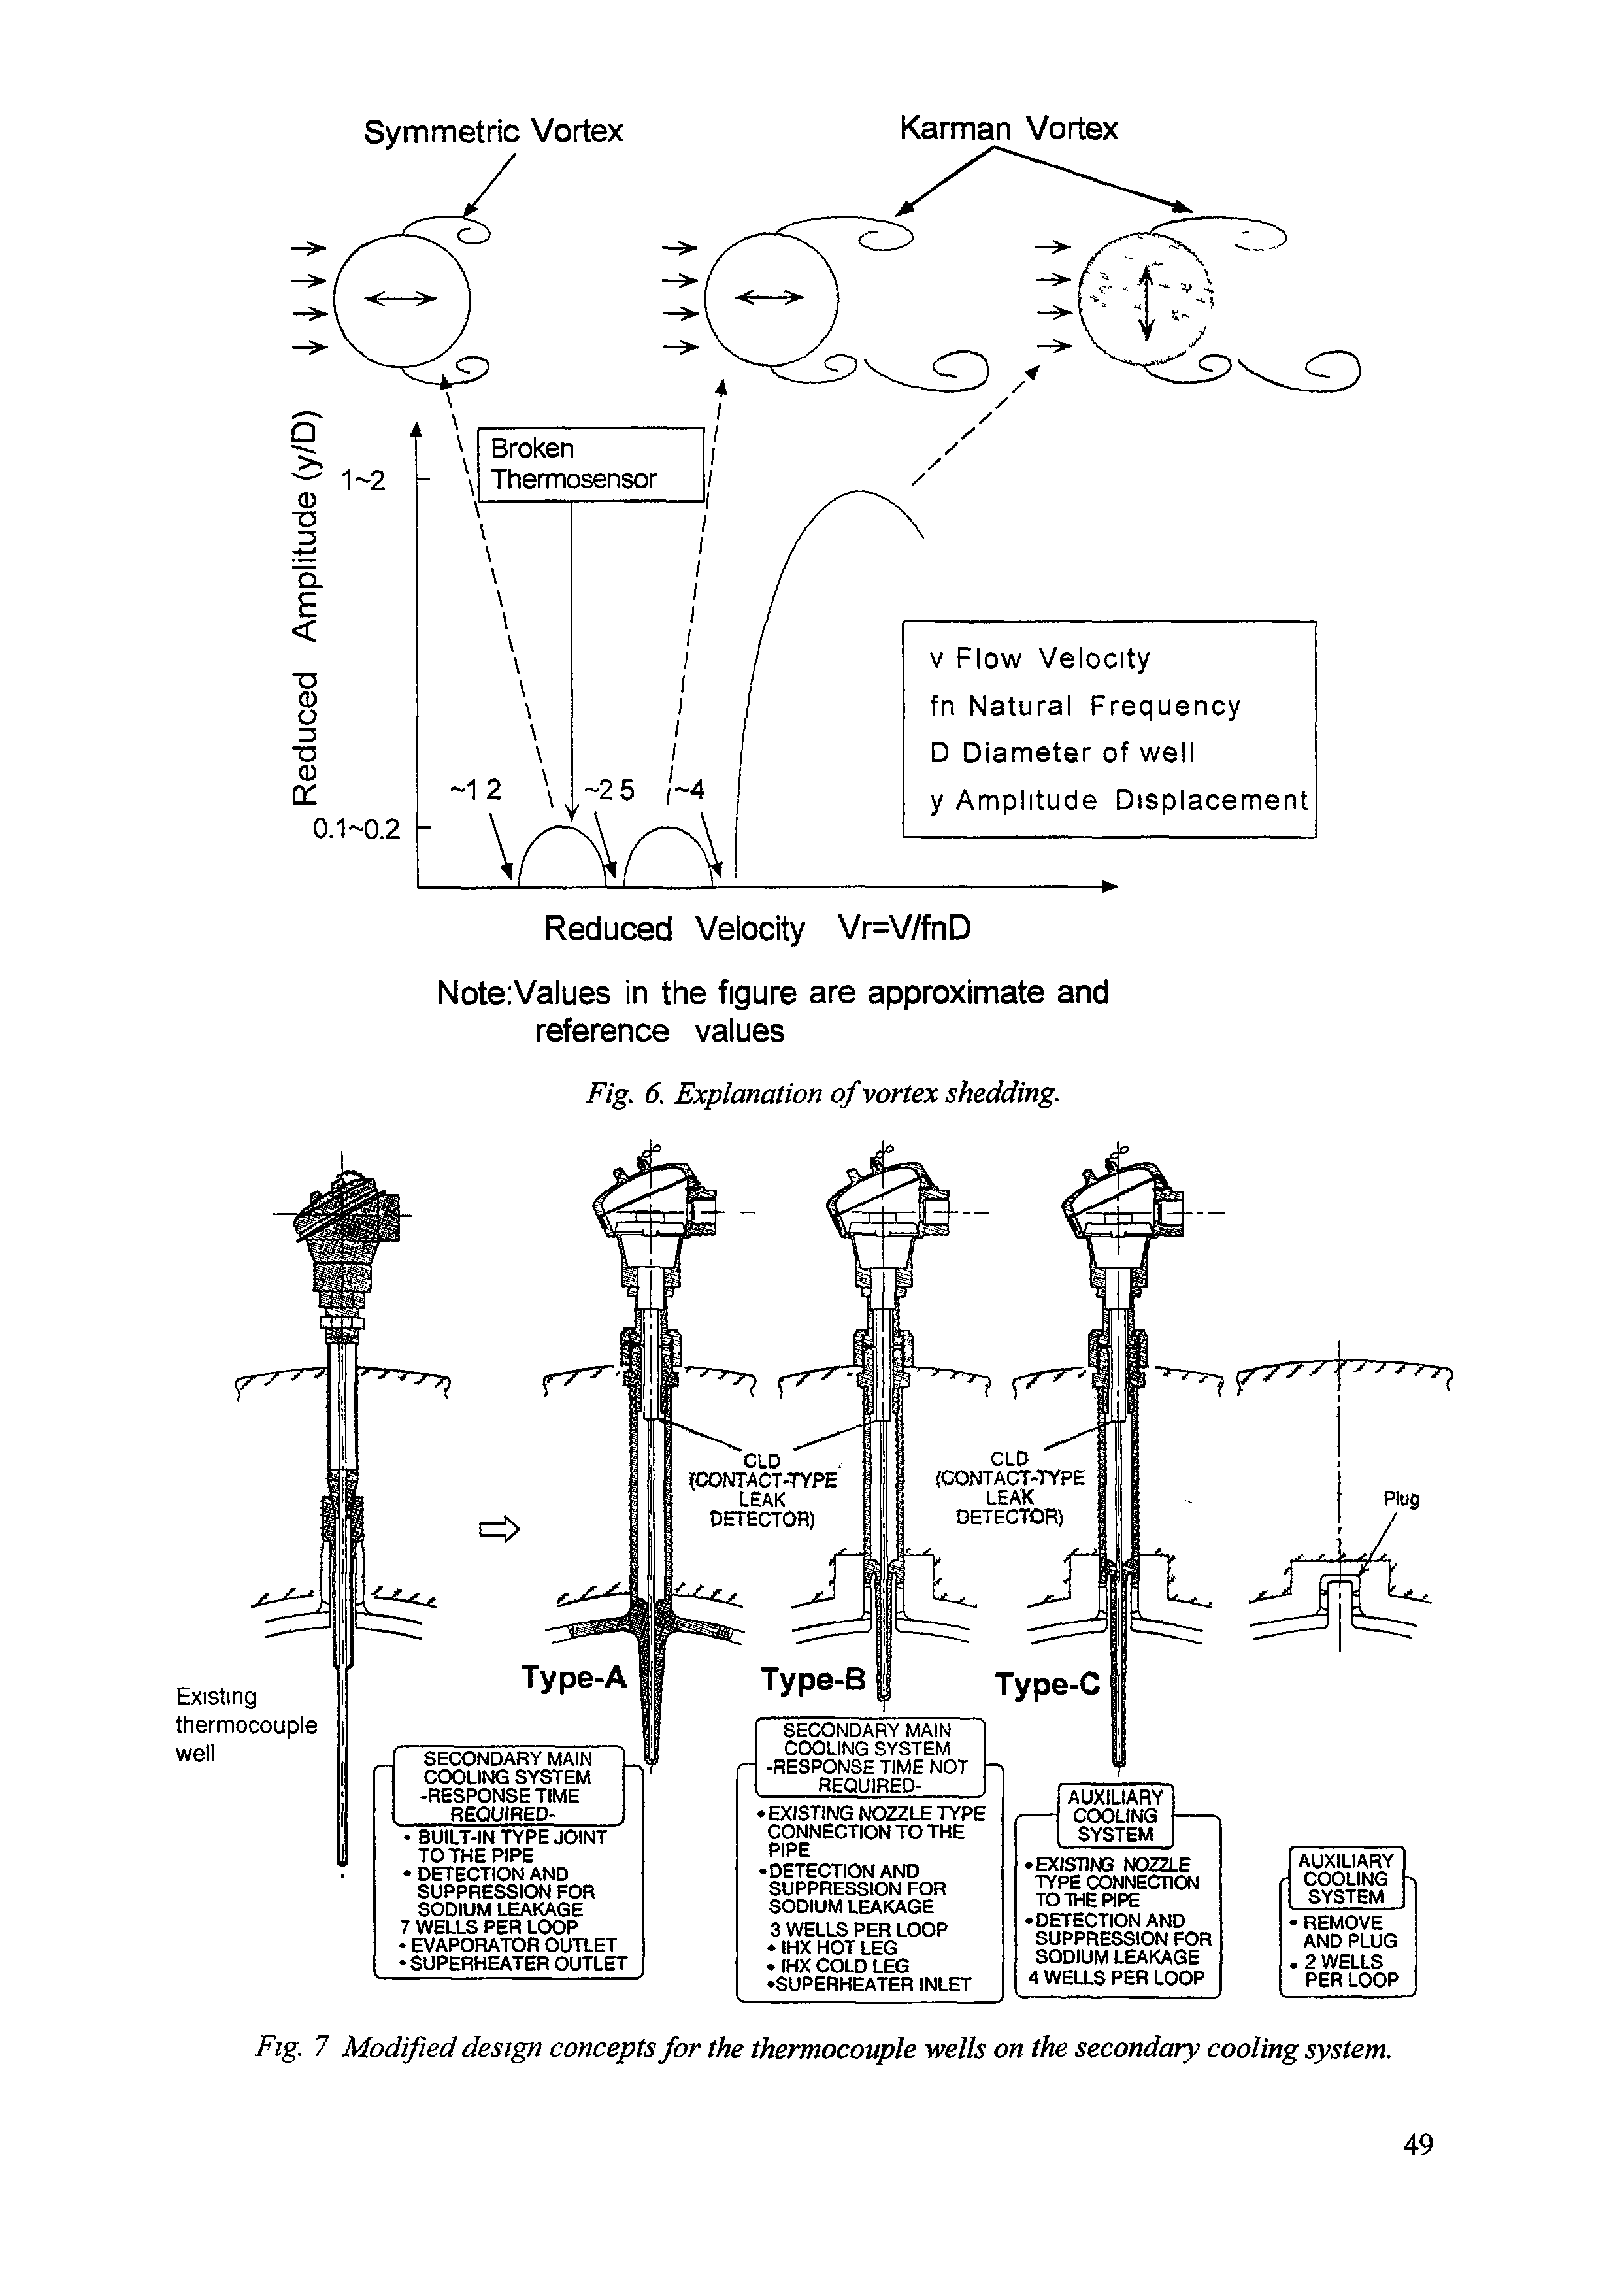 Fig. 7 Modified design concepts for the thermocouple wells on the secondary cooling system.